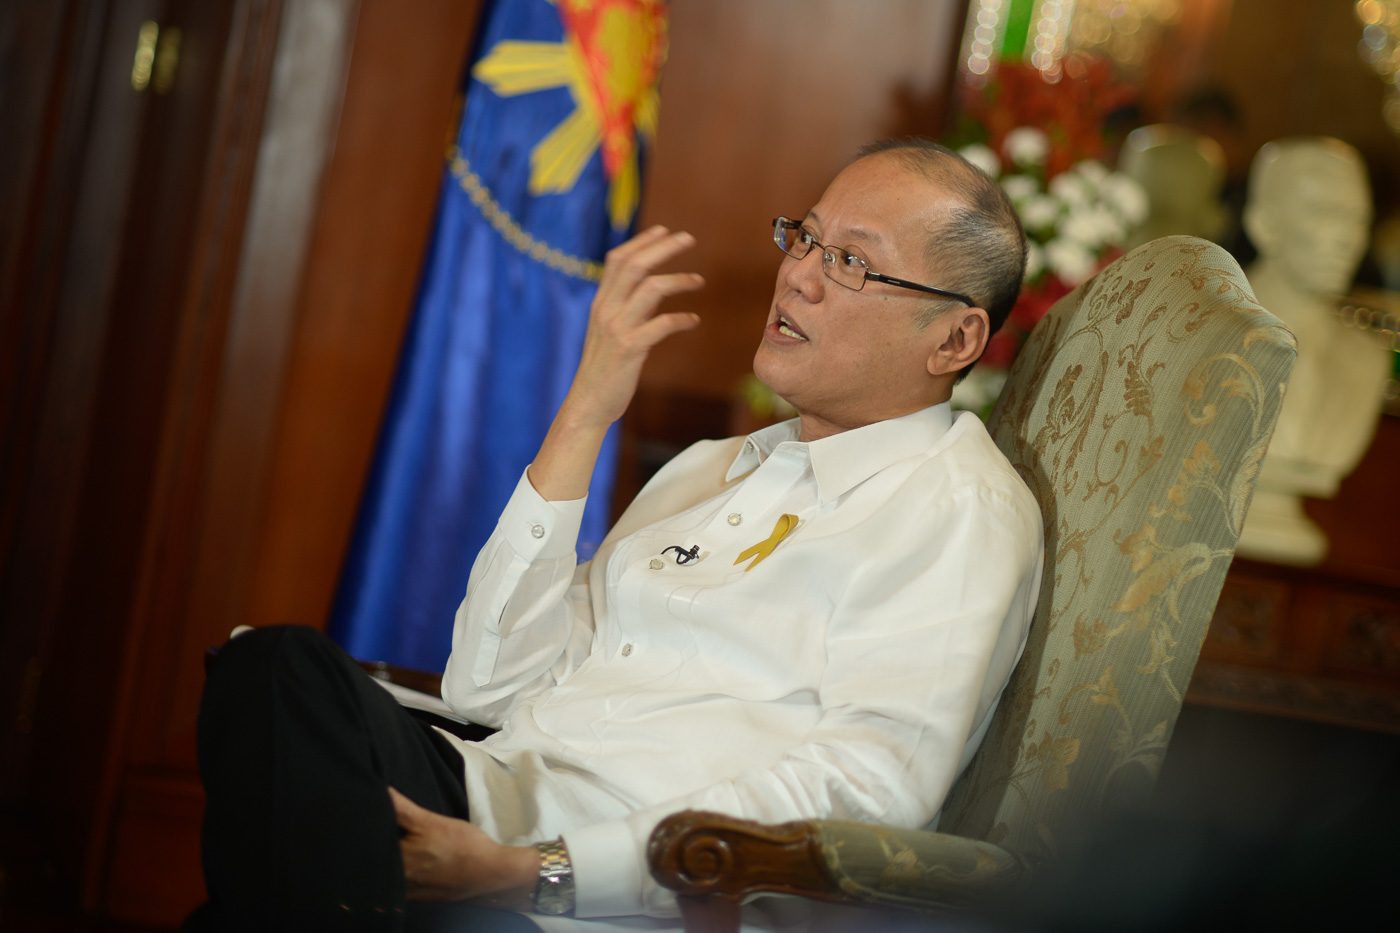 Political comeback after Palace? Only when I’m needed – Aquino